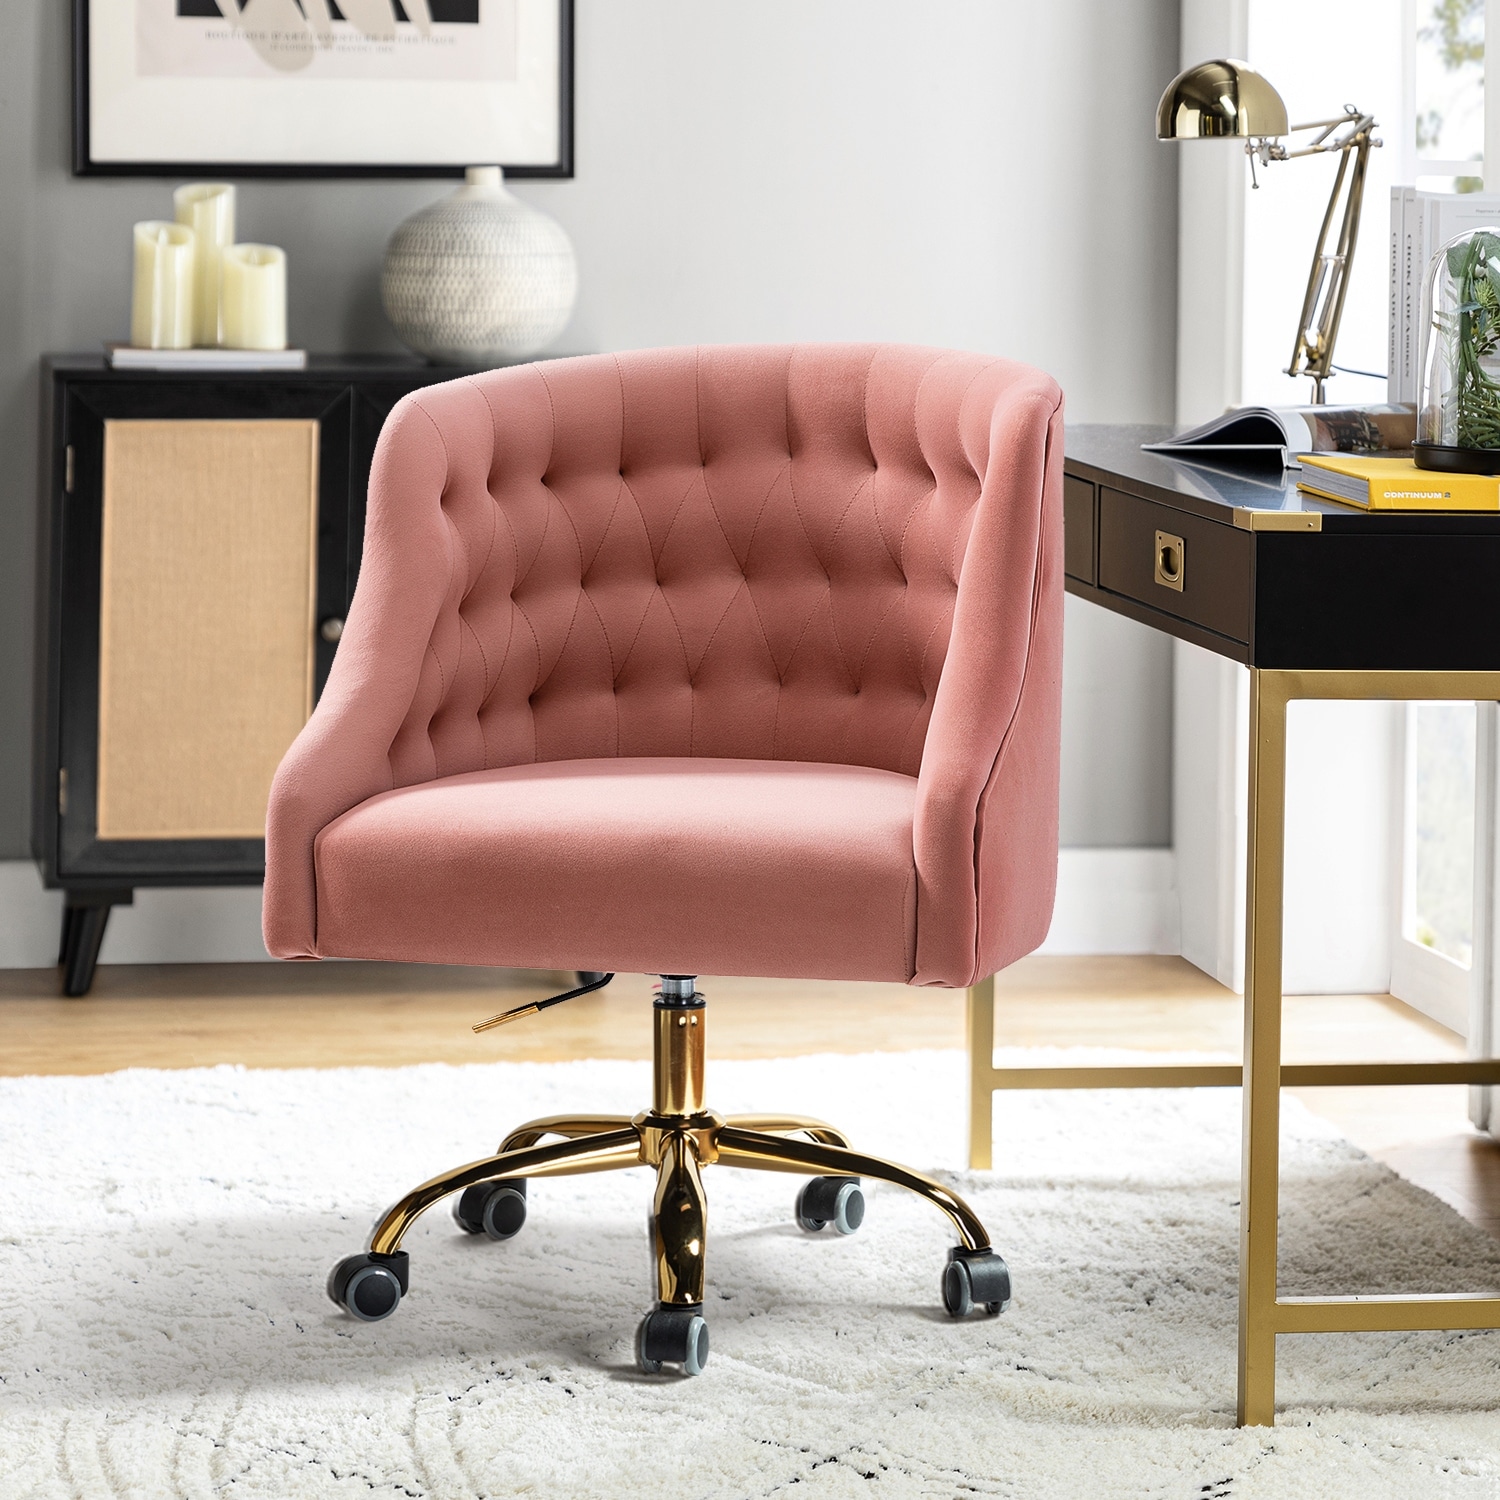 https://ak1.ostkcdn.com/images/products/is/images/direct/dc3692ea2db3c43bcc290a59612f50ace62a5c21/Modern-Velvet-Tufted-Office-Chair-with-Gold-Metal-Base-by-HULALA-HOME.jpg